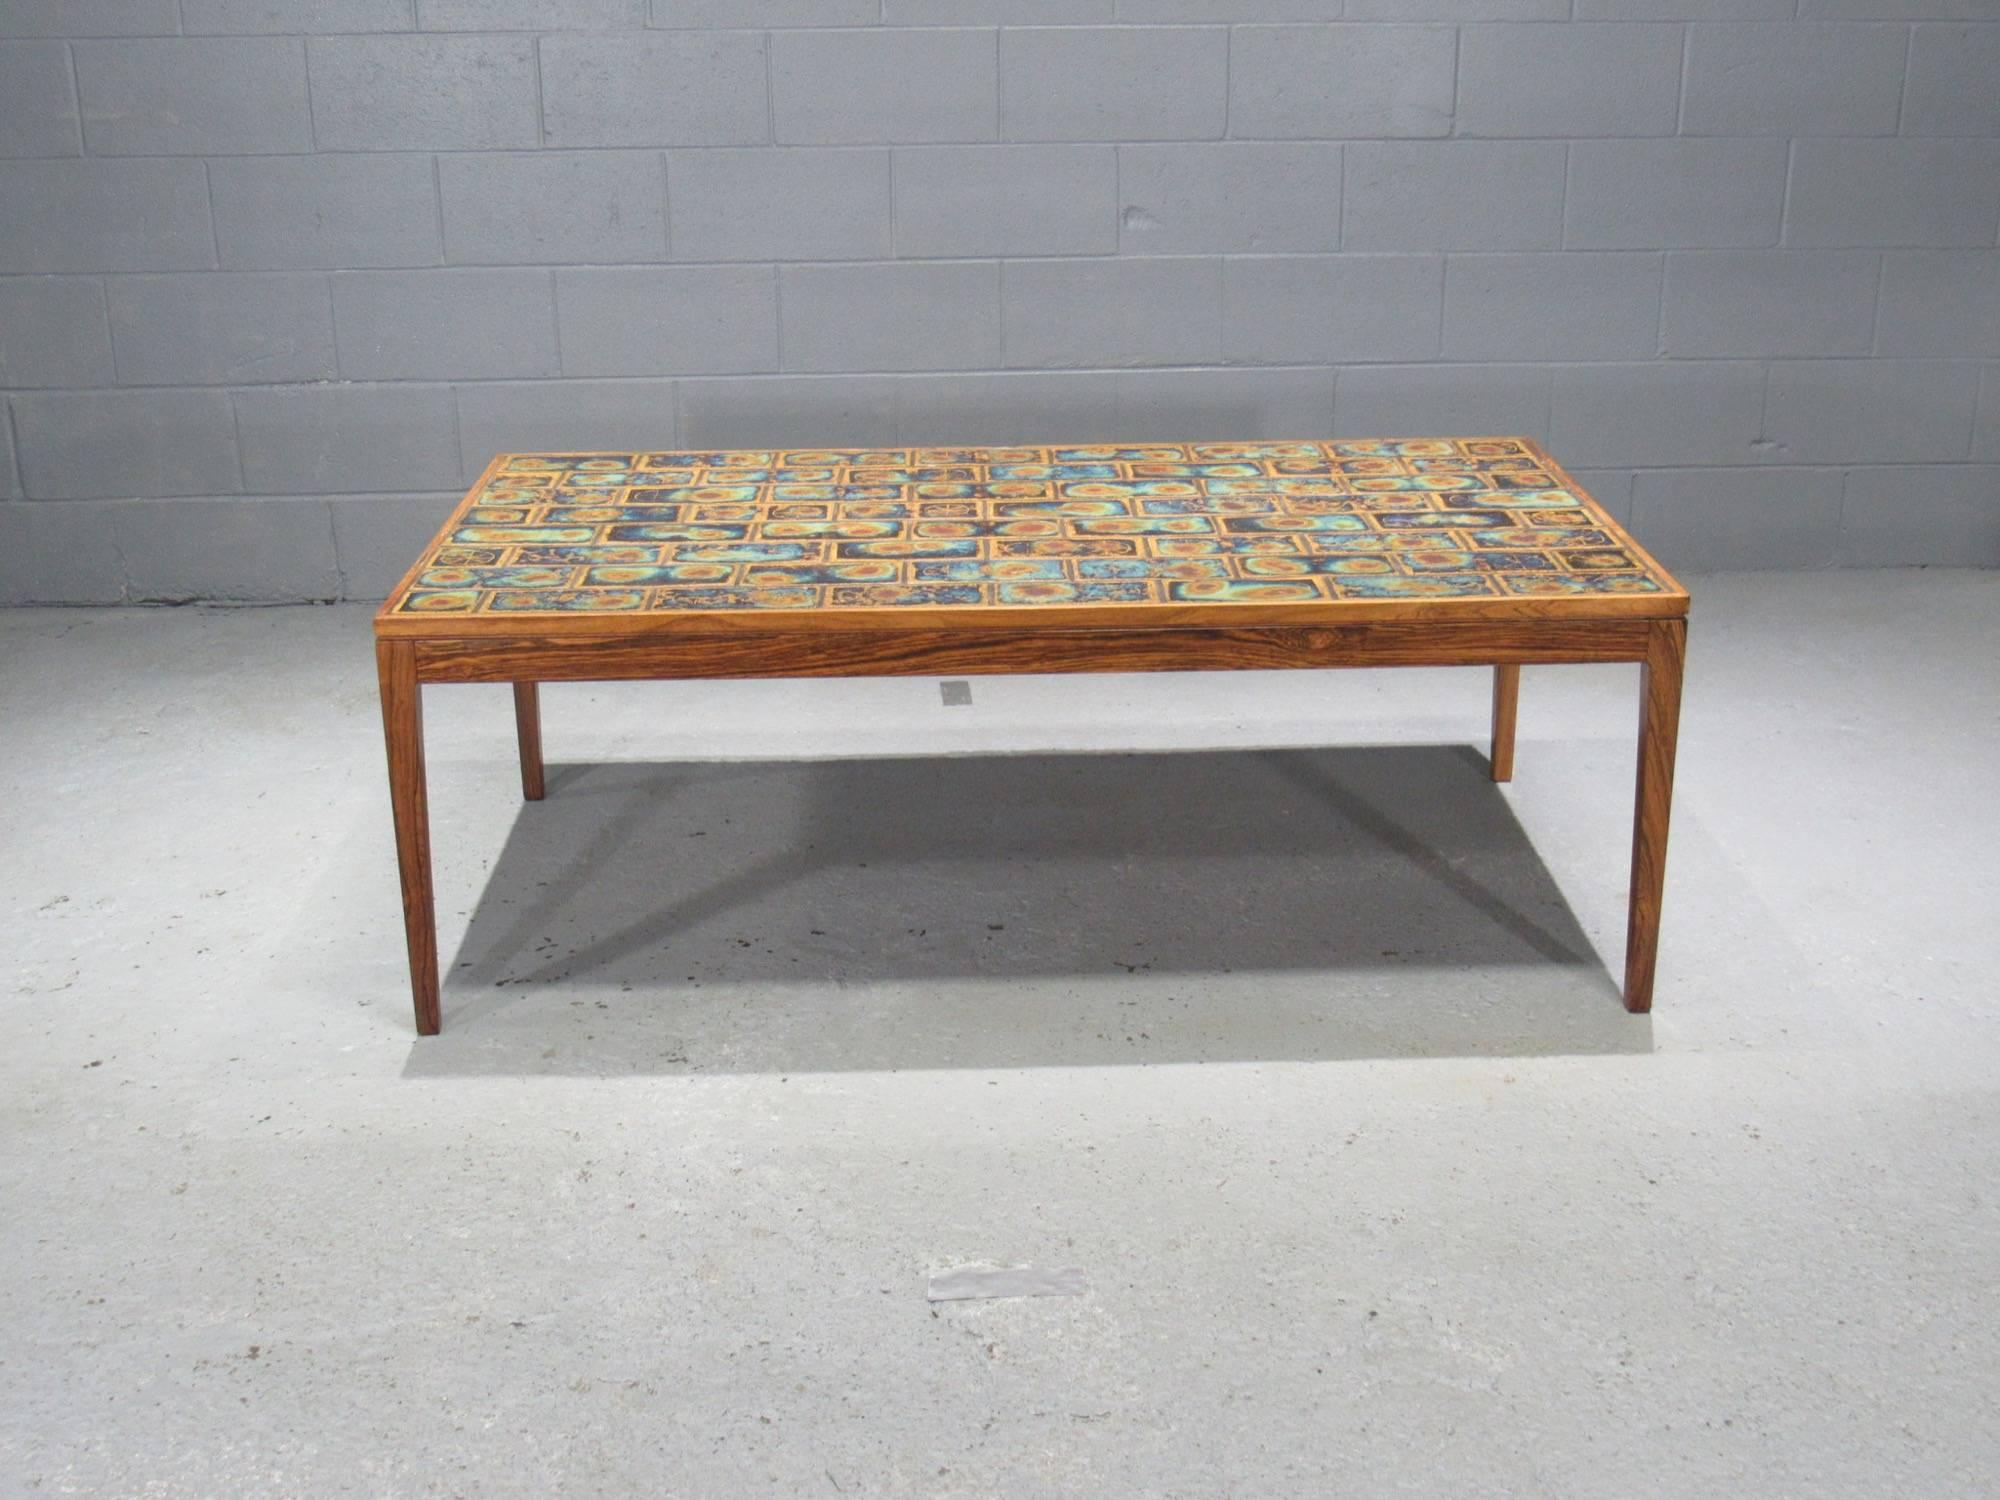 Large Danish Modern Rosewood and Tile Coffee Table. This stunning tile coffee table features beautiful tile work and a solid rosewood frame.